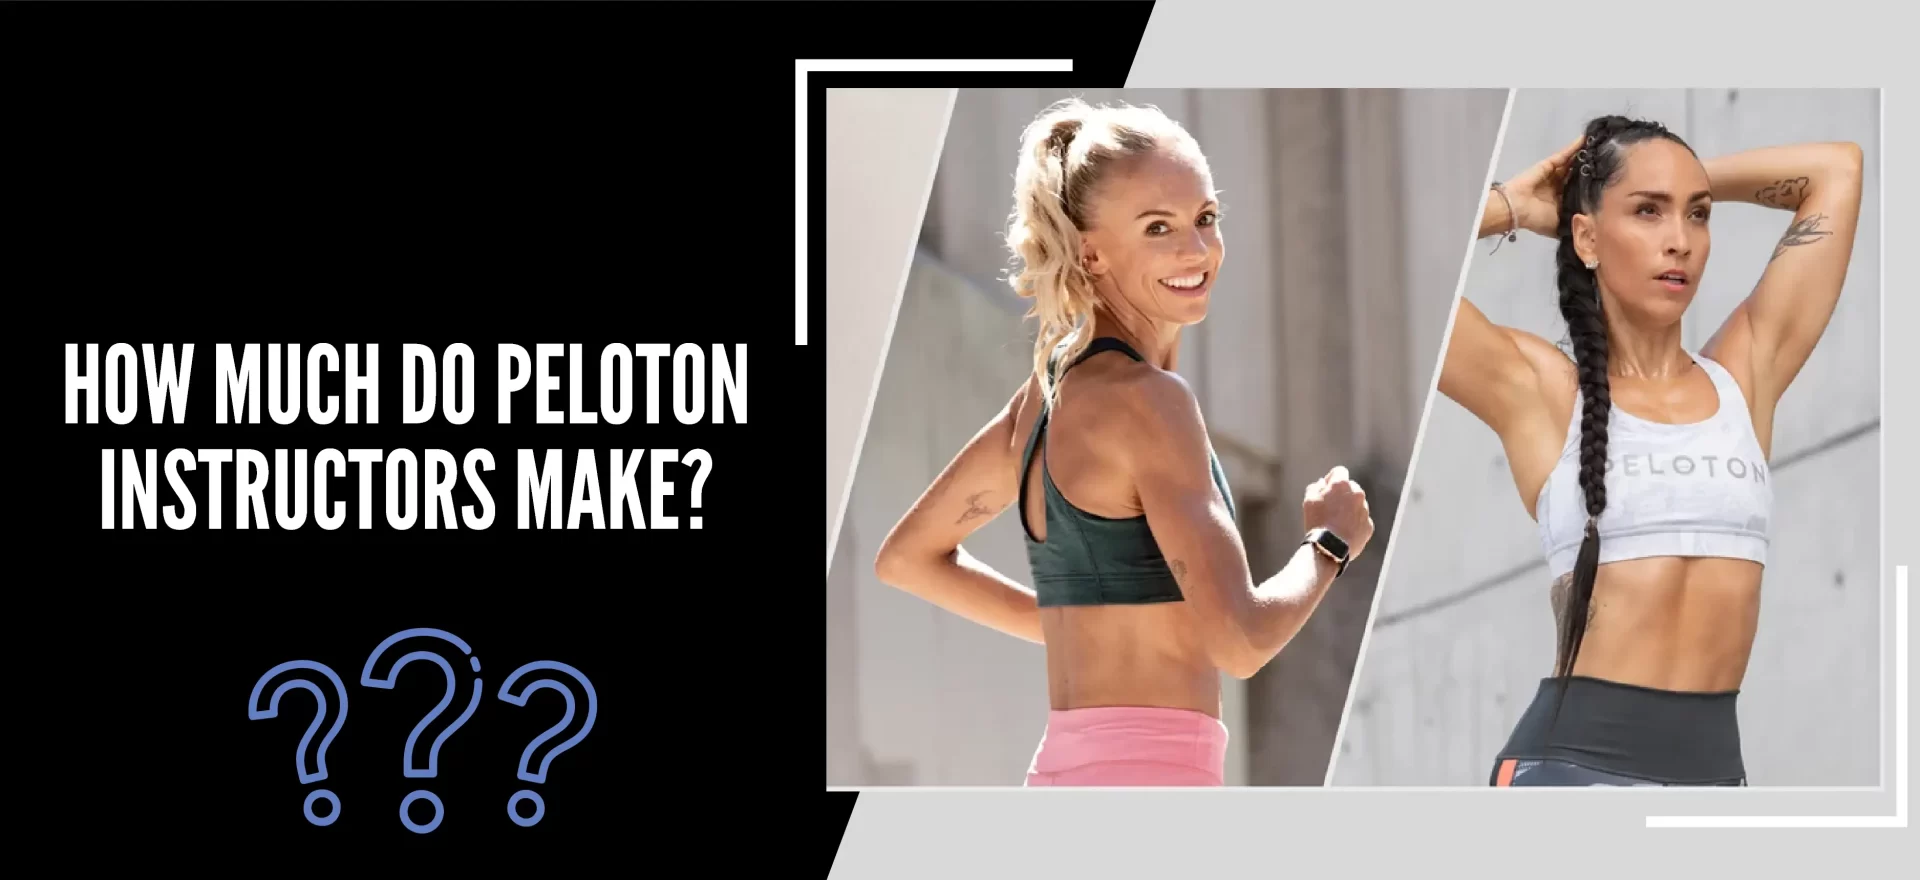 How Much Do Peloton Instructors Make?